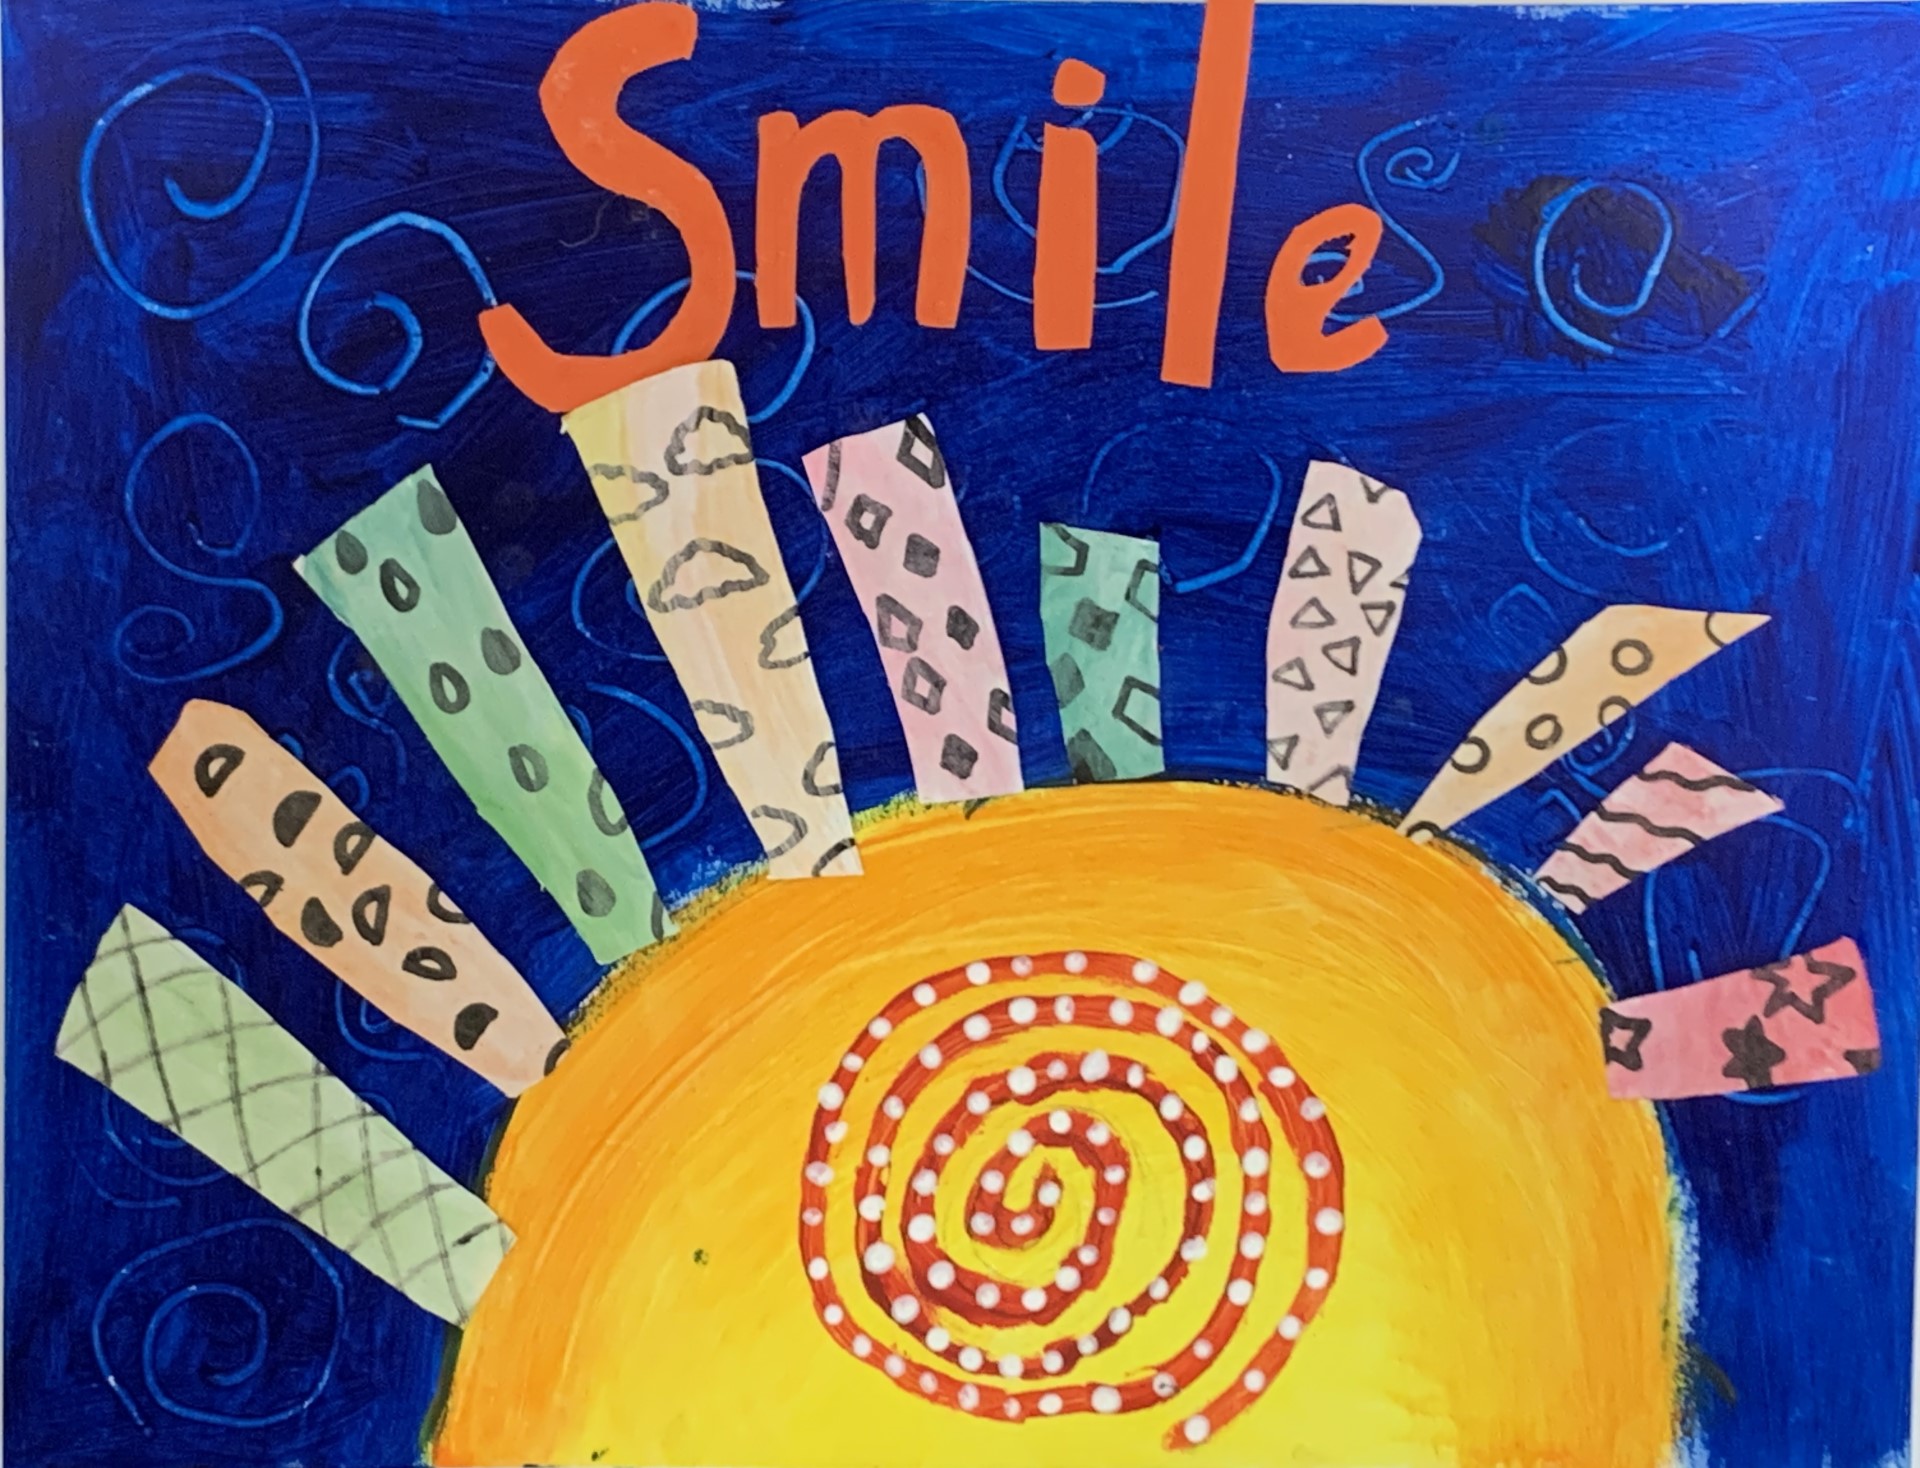 student artwork of the sun on a blue background with the word Smile above it.  The rays of the sun are a range of patterns